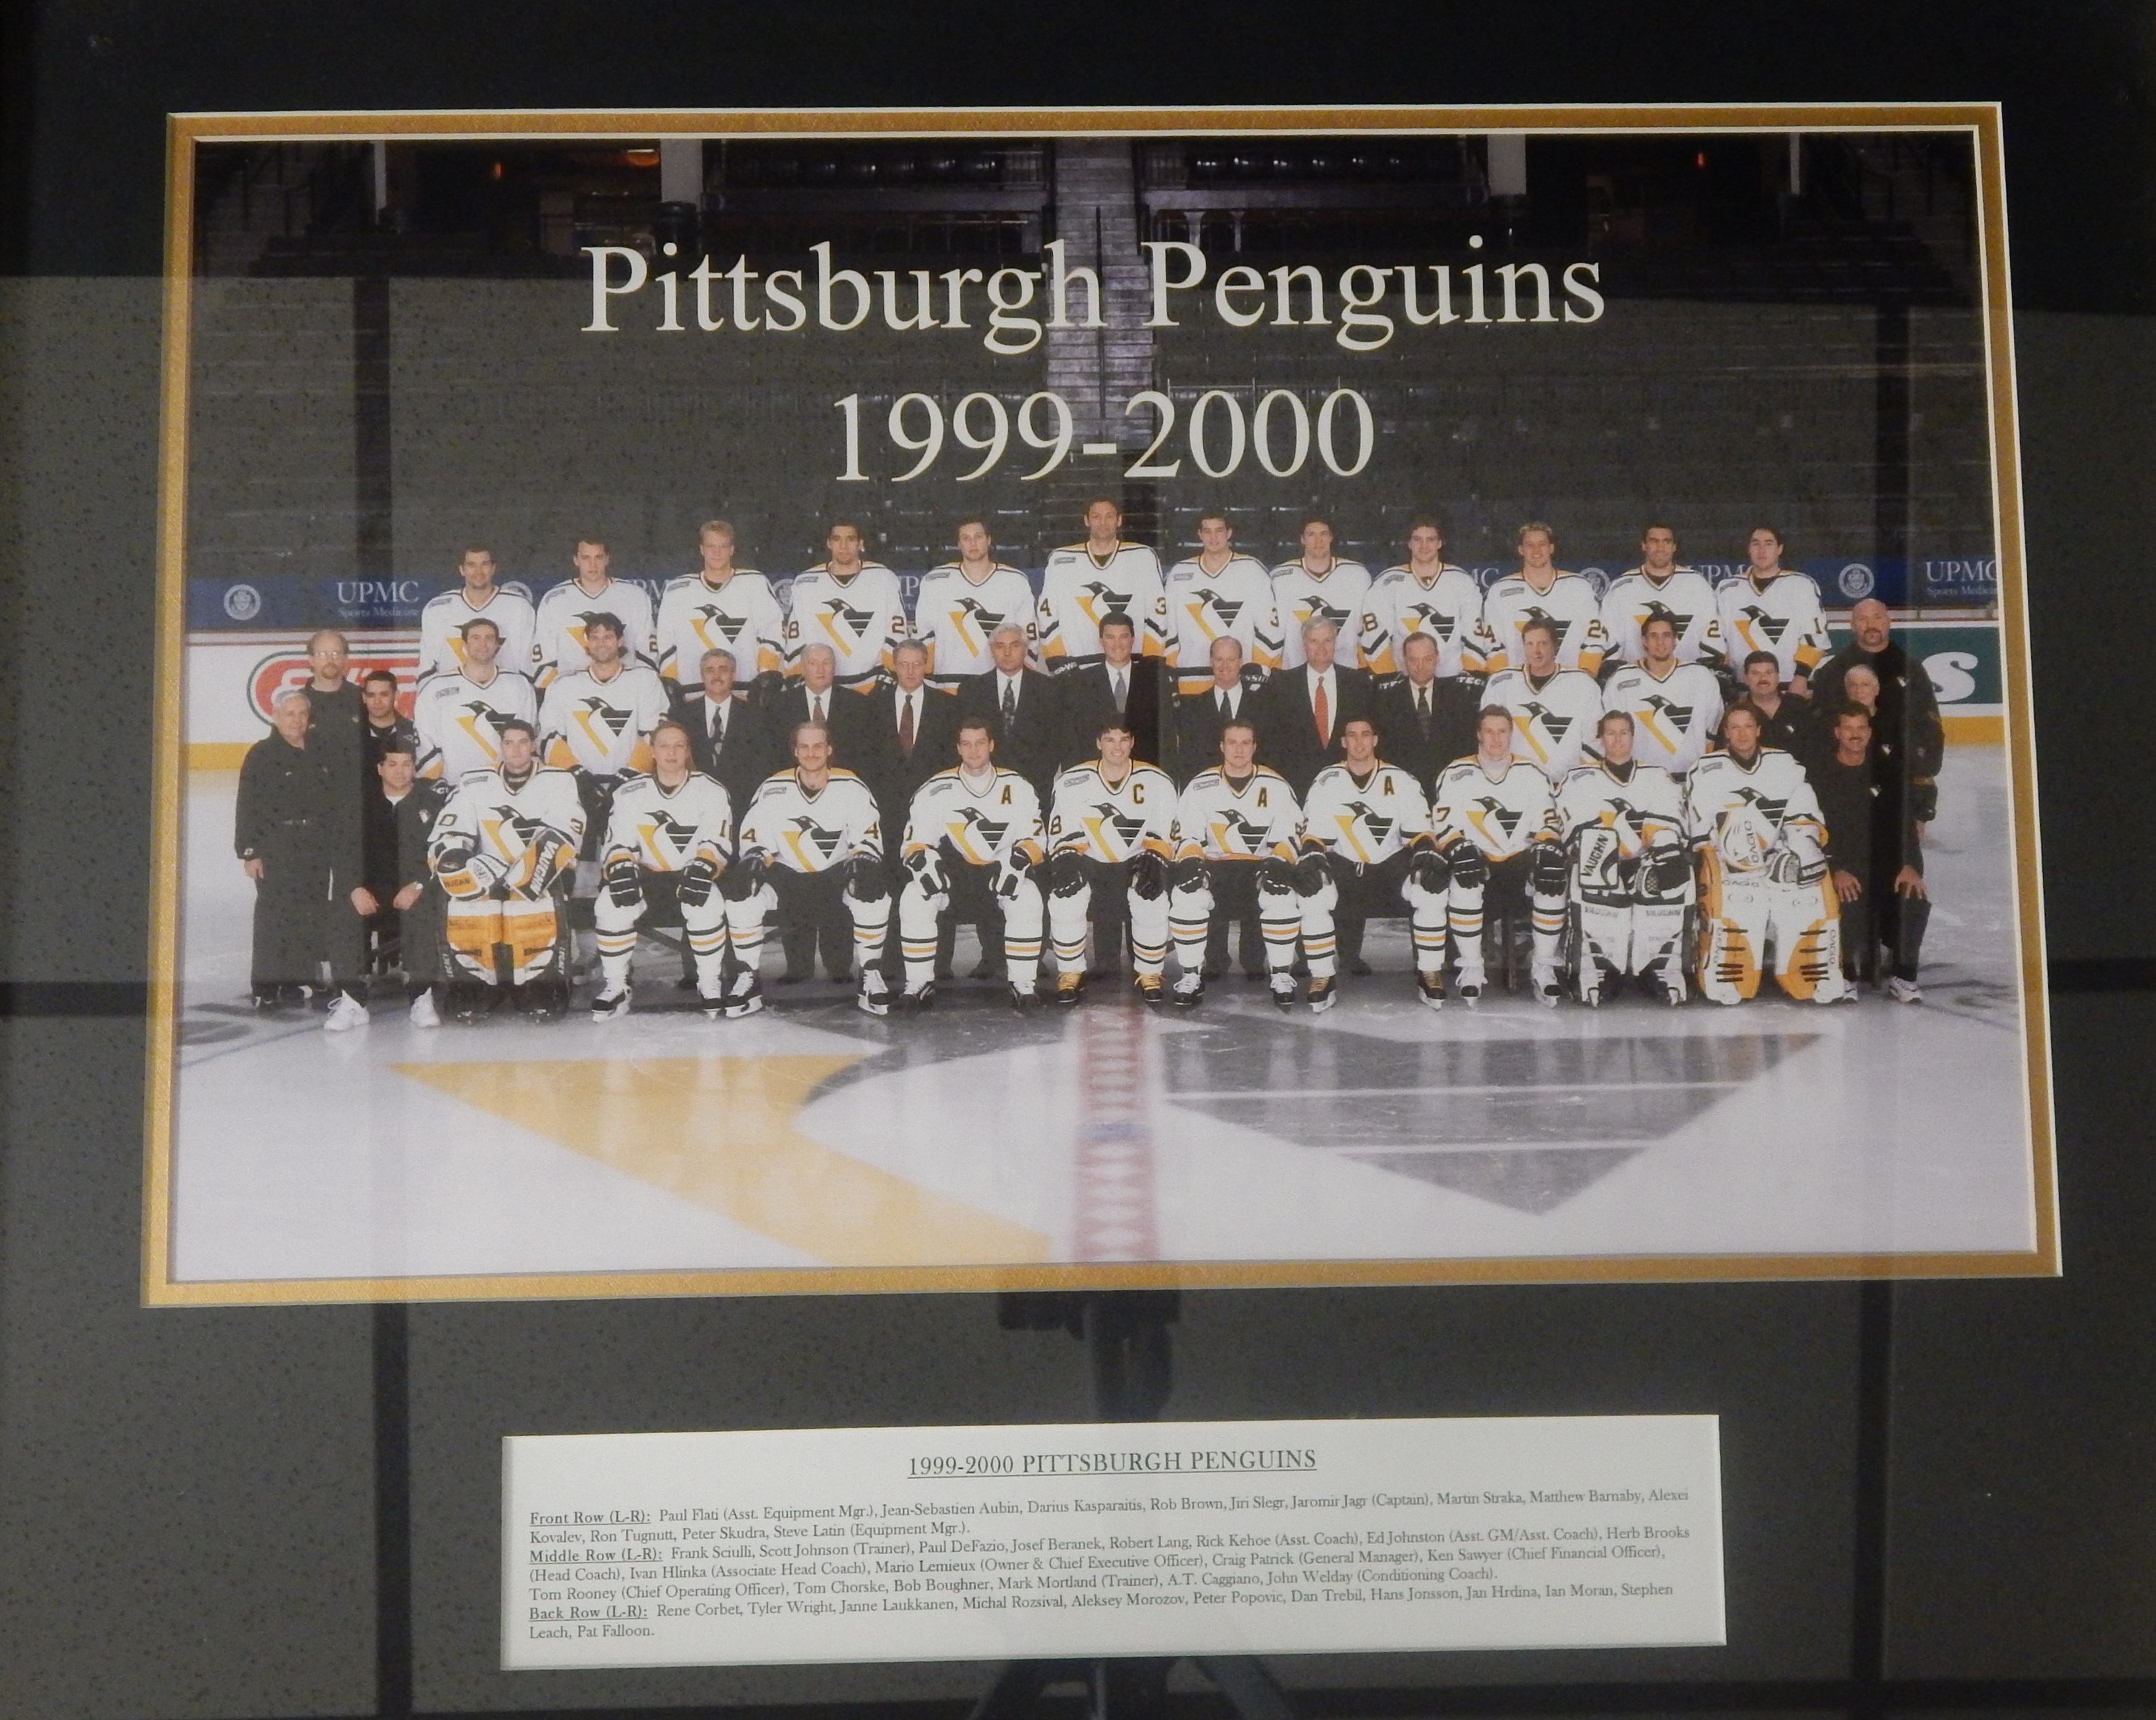 Hockey - 1999 Pittsburgh Penguins Team Photograph Once Hung in Civic Center (ex-Pitt Penguins Exec)